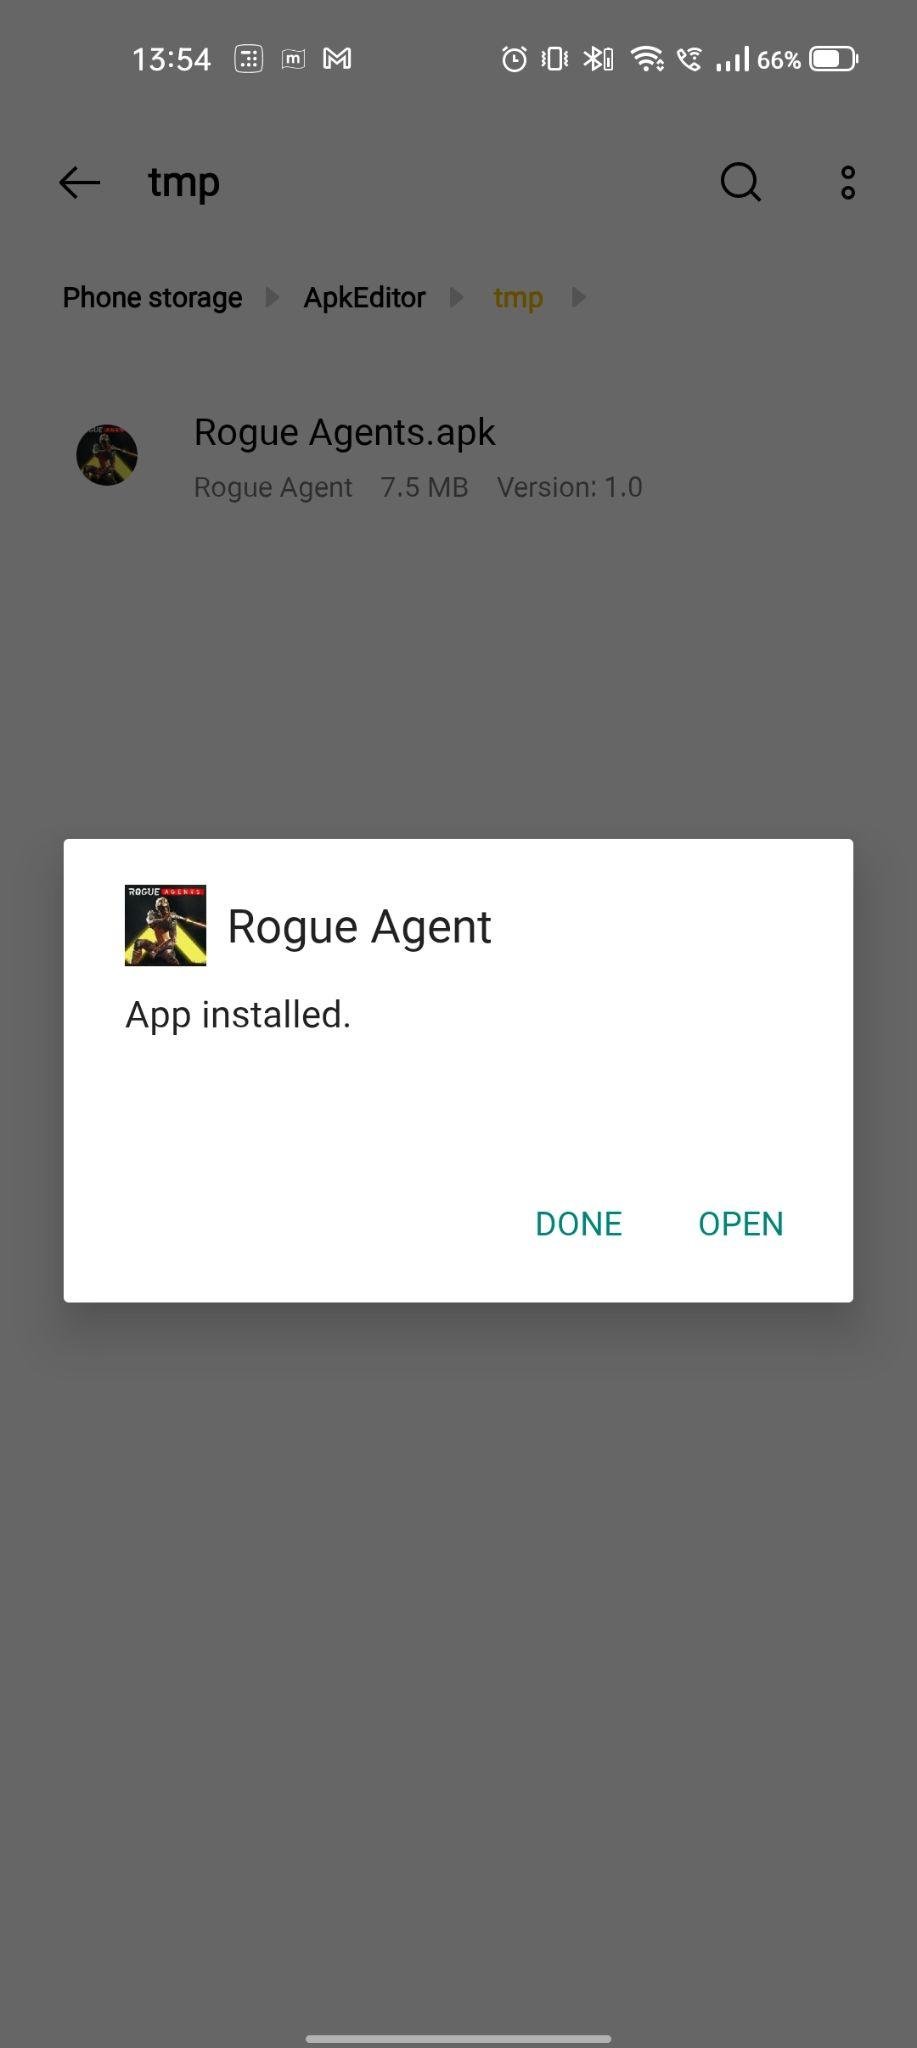 Rogue Agents apk installed